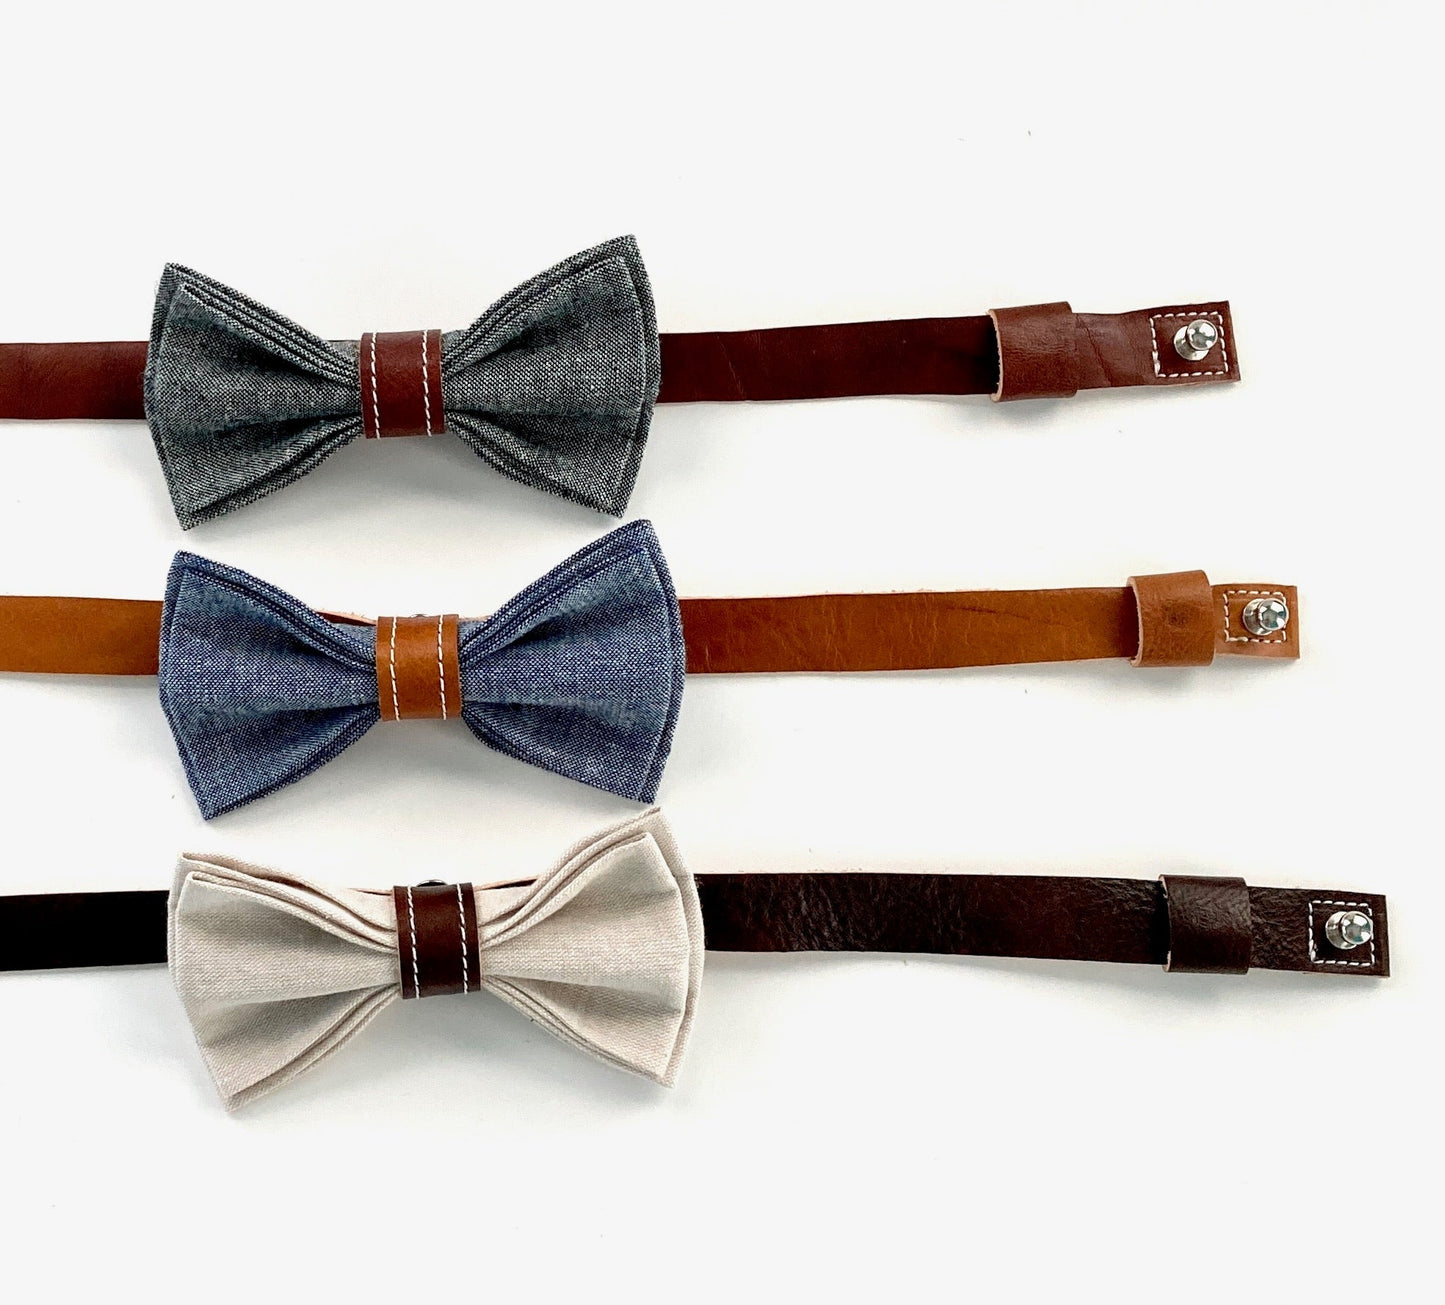 Wedding Supender and Bowtie Set in Texas Oil Black